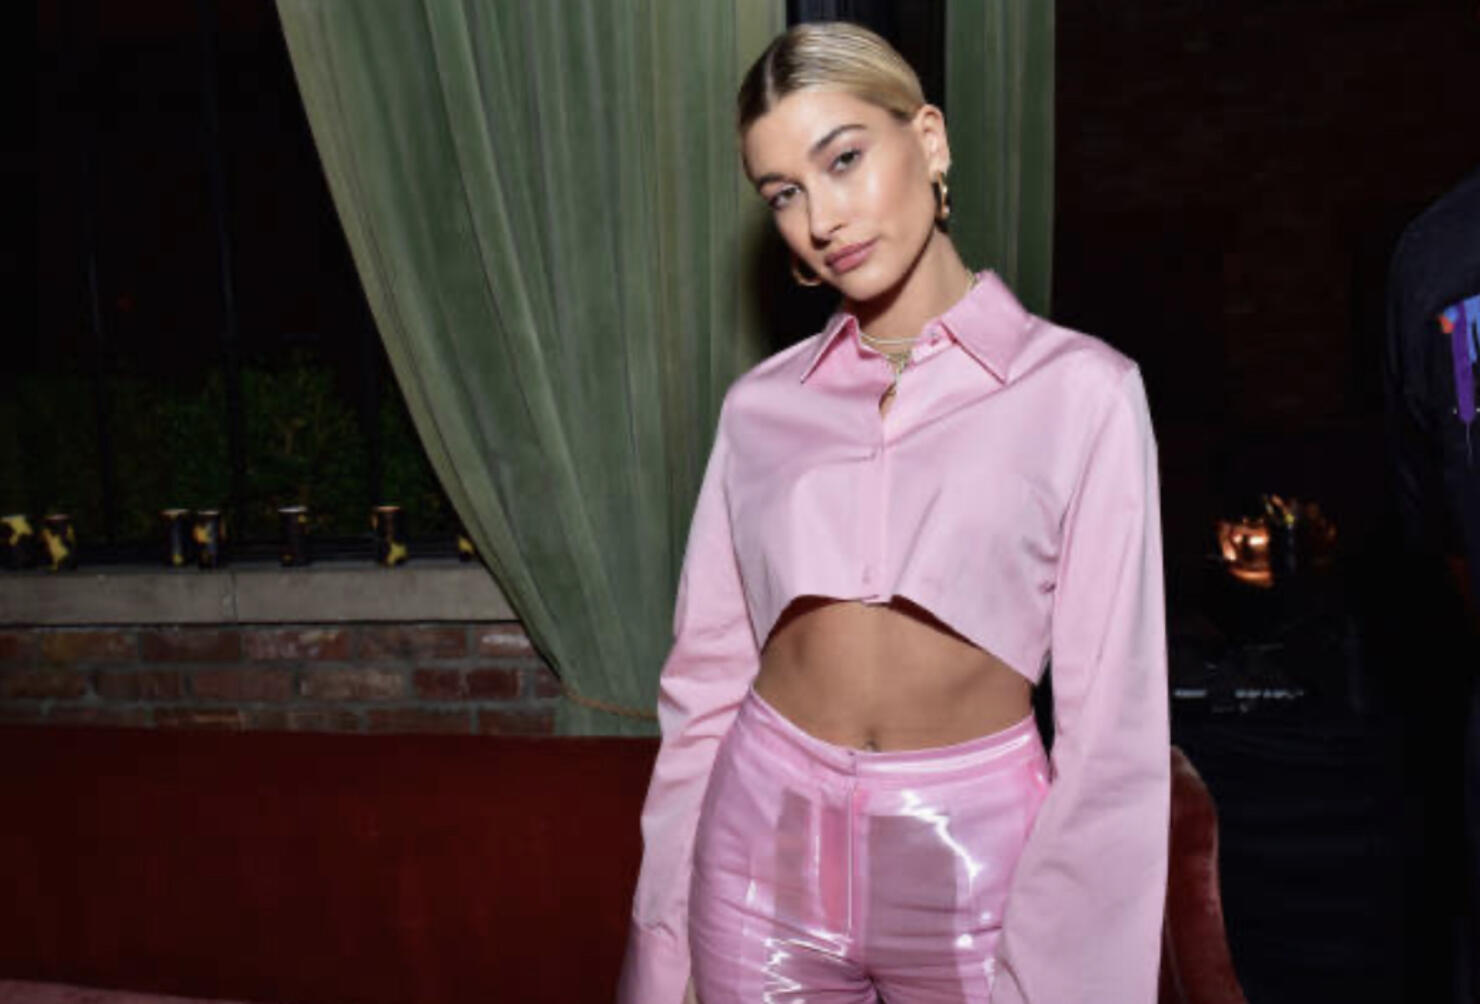 Hailey Bieber is Sultry and Stylish